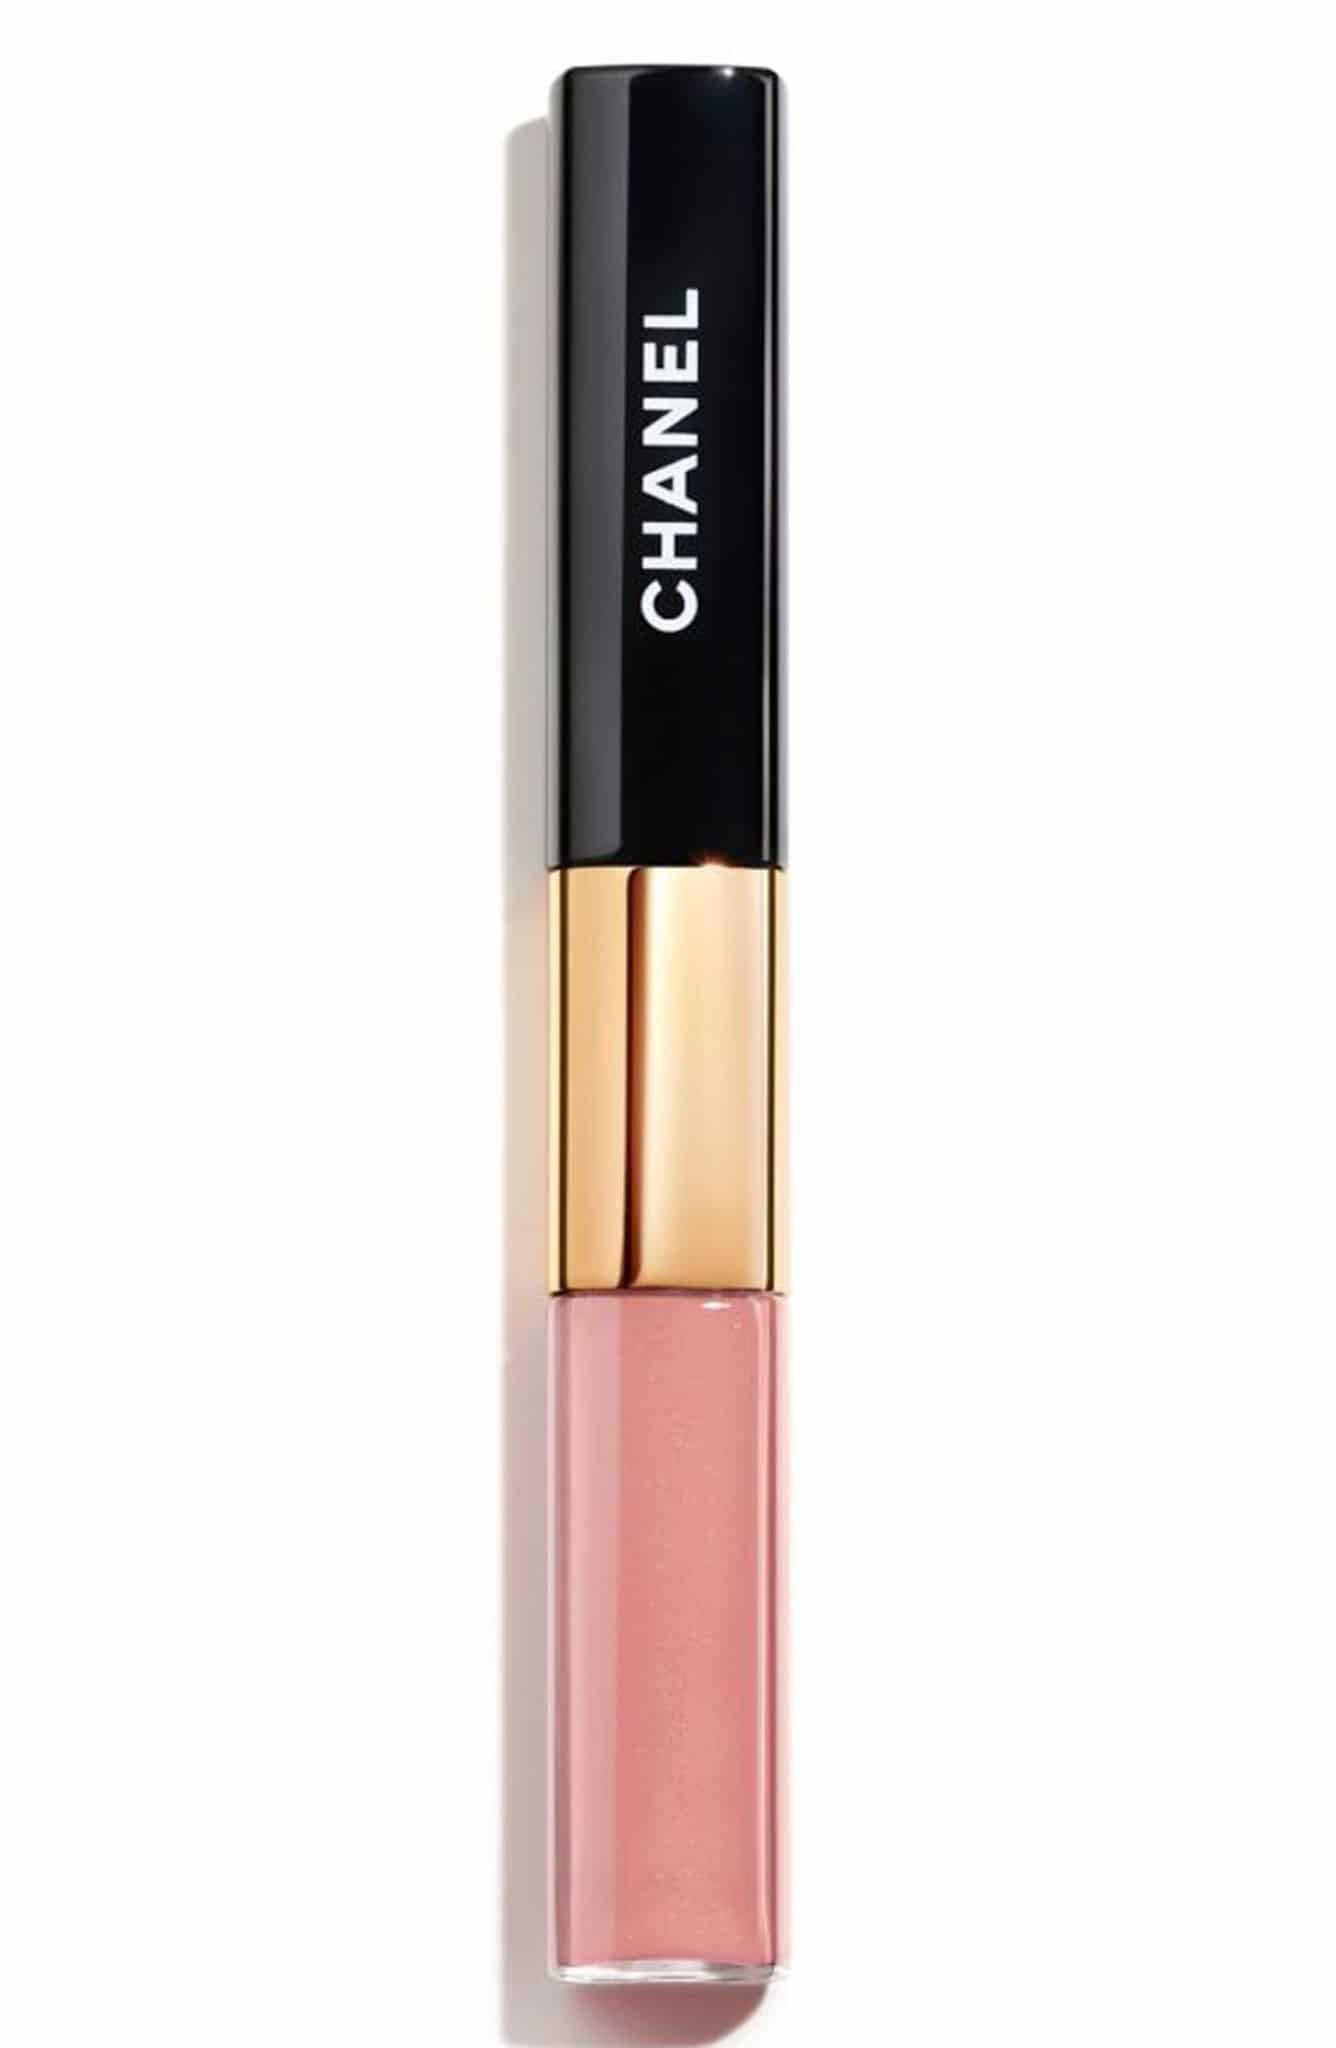 Chanel Long lasting lipstick - longwearing - all day - beauty products - lipgloss - Nordstrom